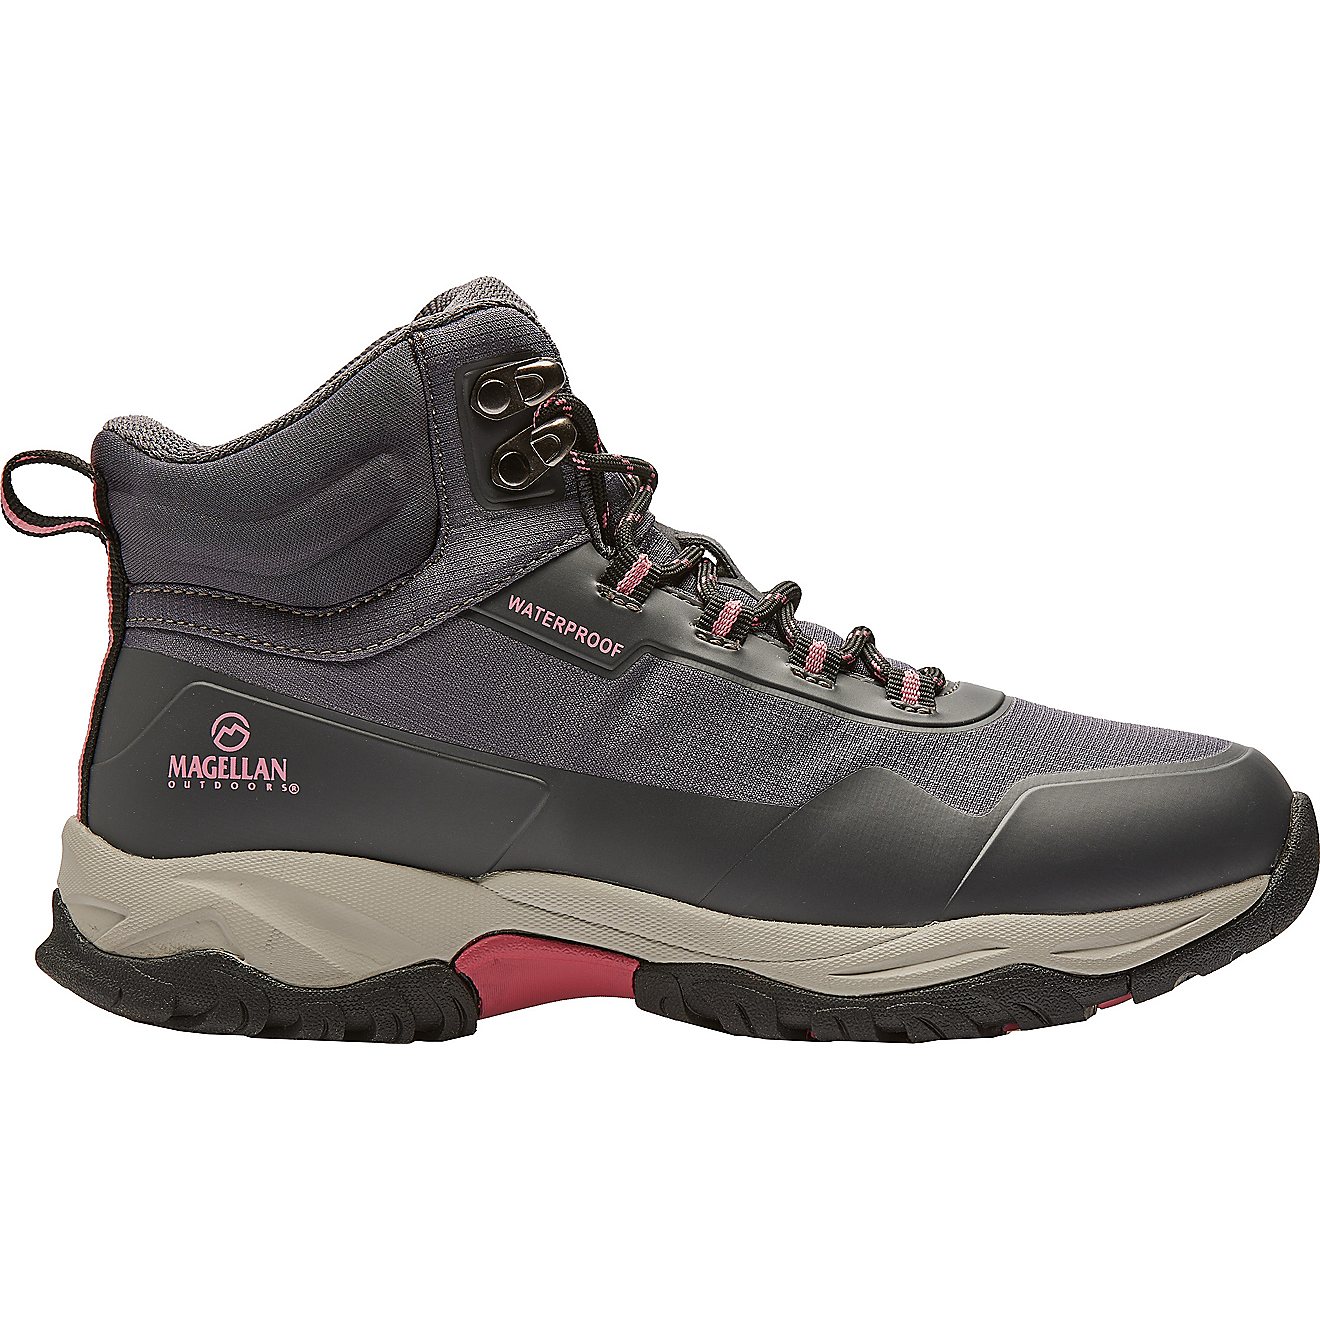 Magellan Outdoors Women's Emory II Shoes                                                                                         - view number 1